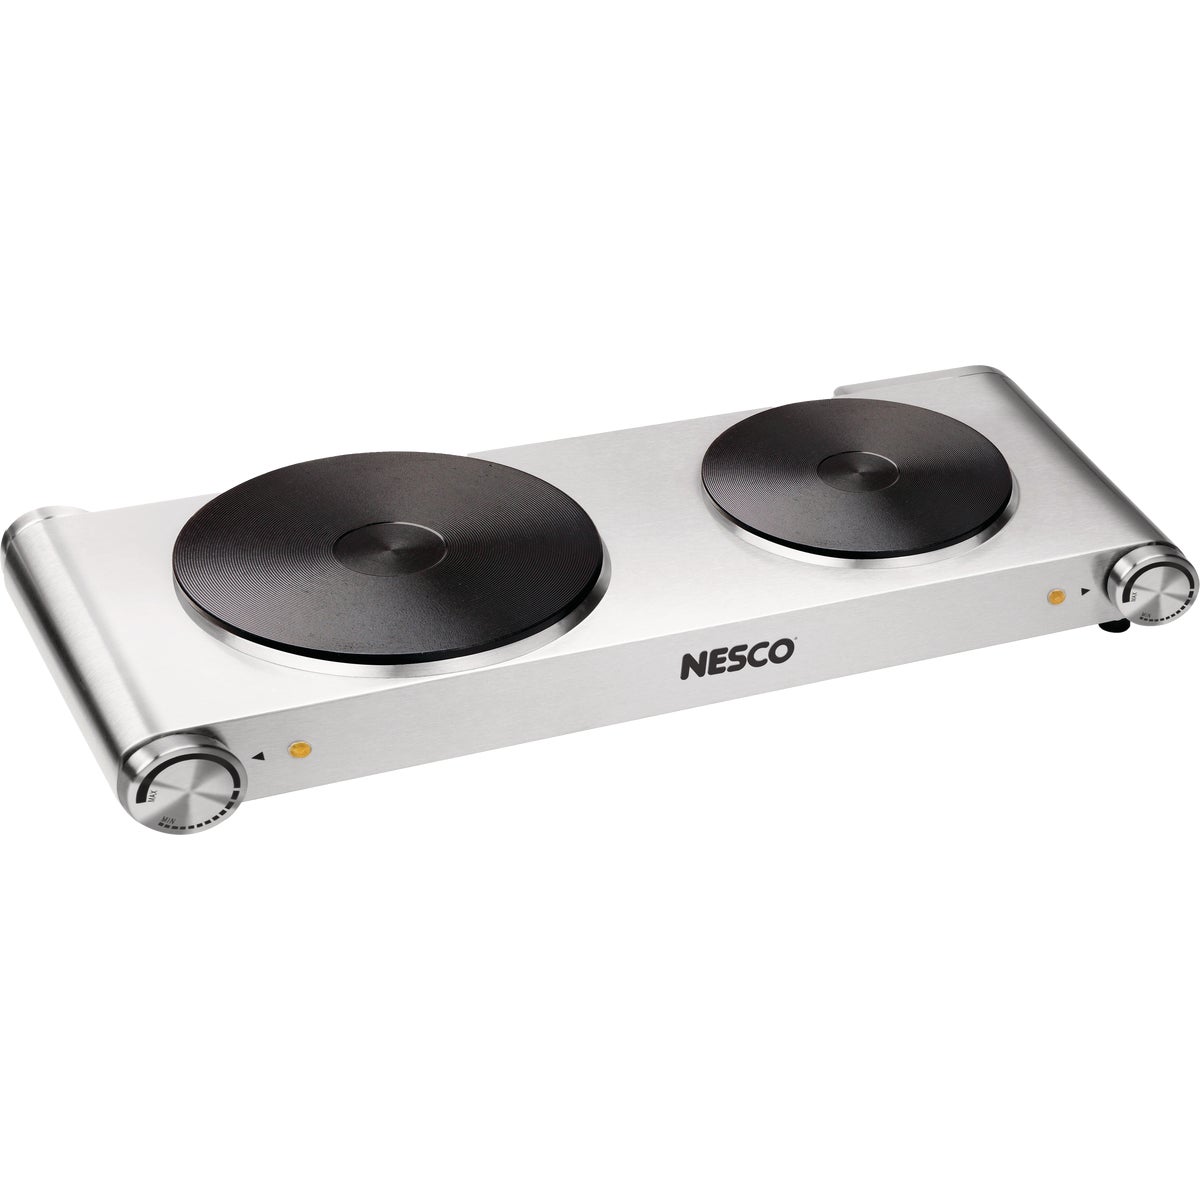 Nesco Double Hot Plate with Die Cast Burner